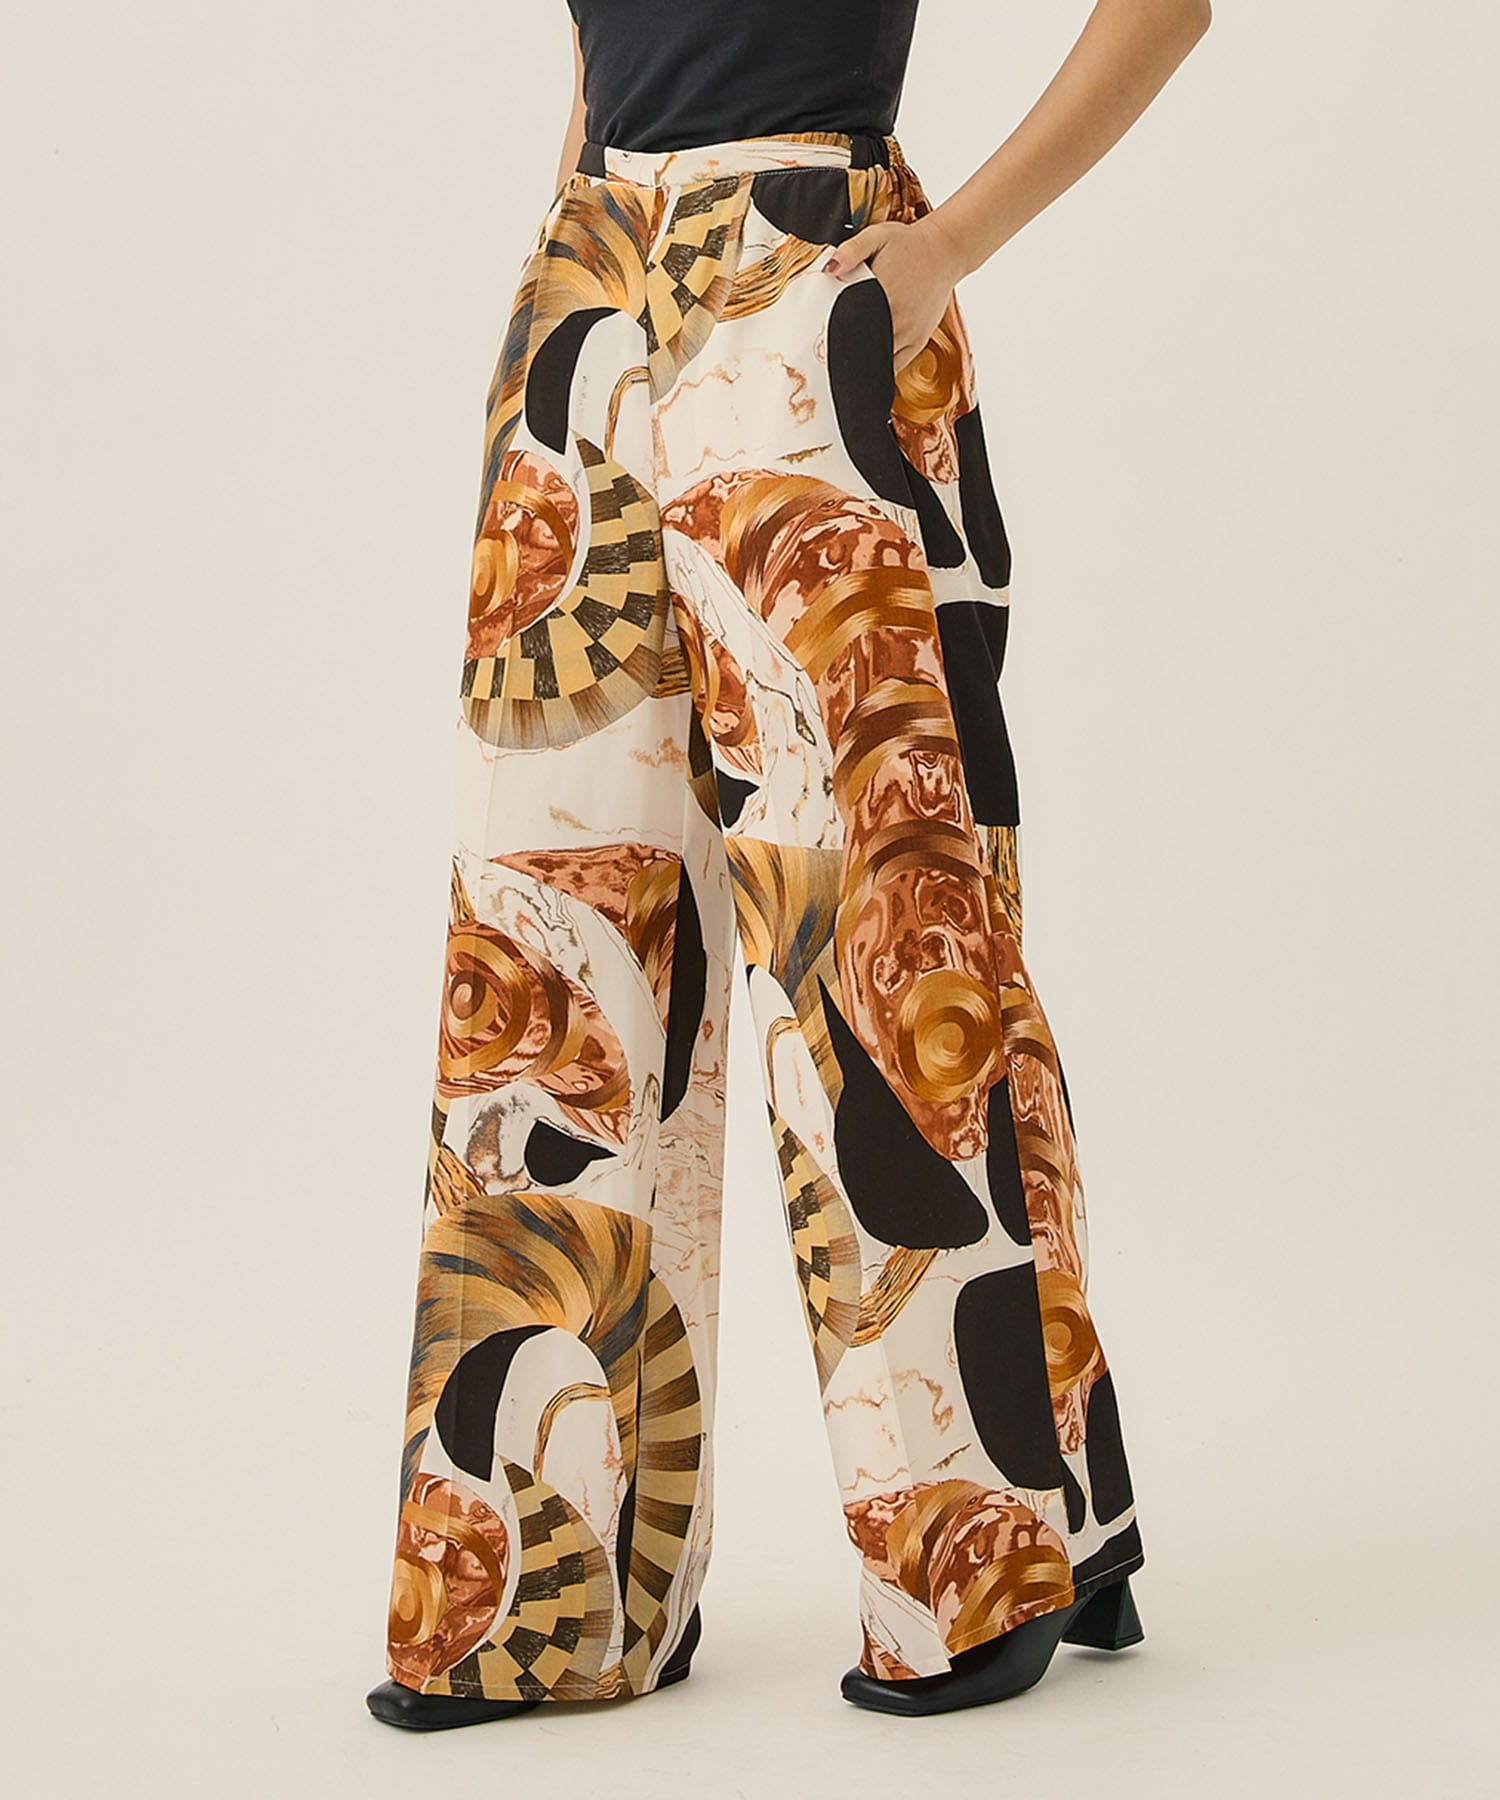 mame kurogouchi / Marble Print Trousers | camillevieraservices.com